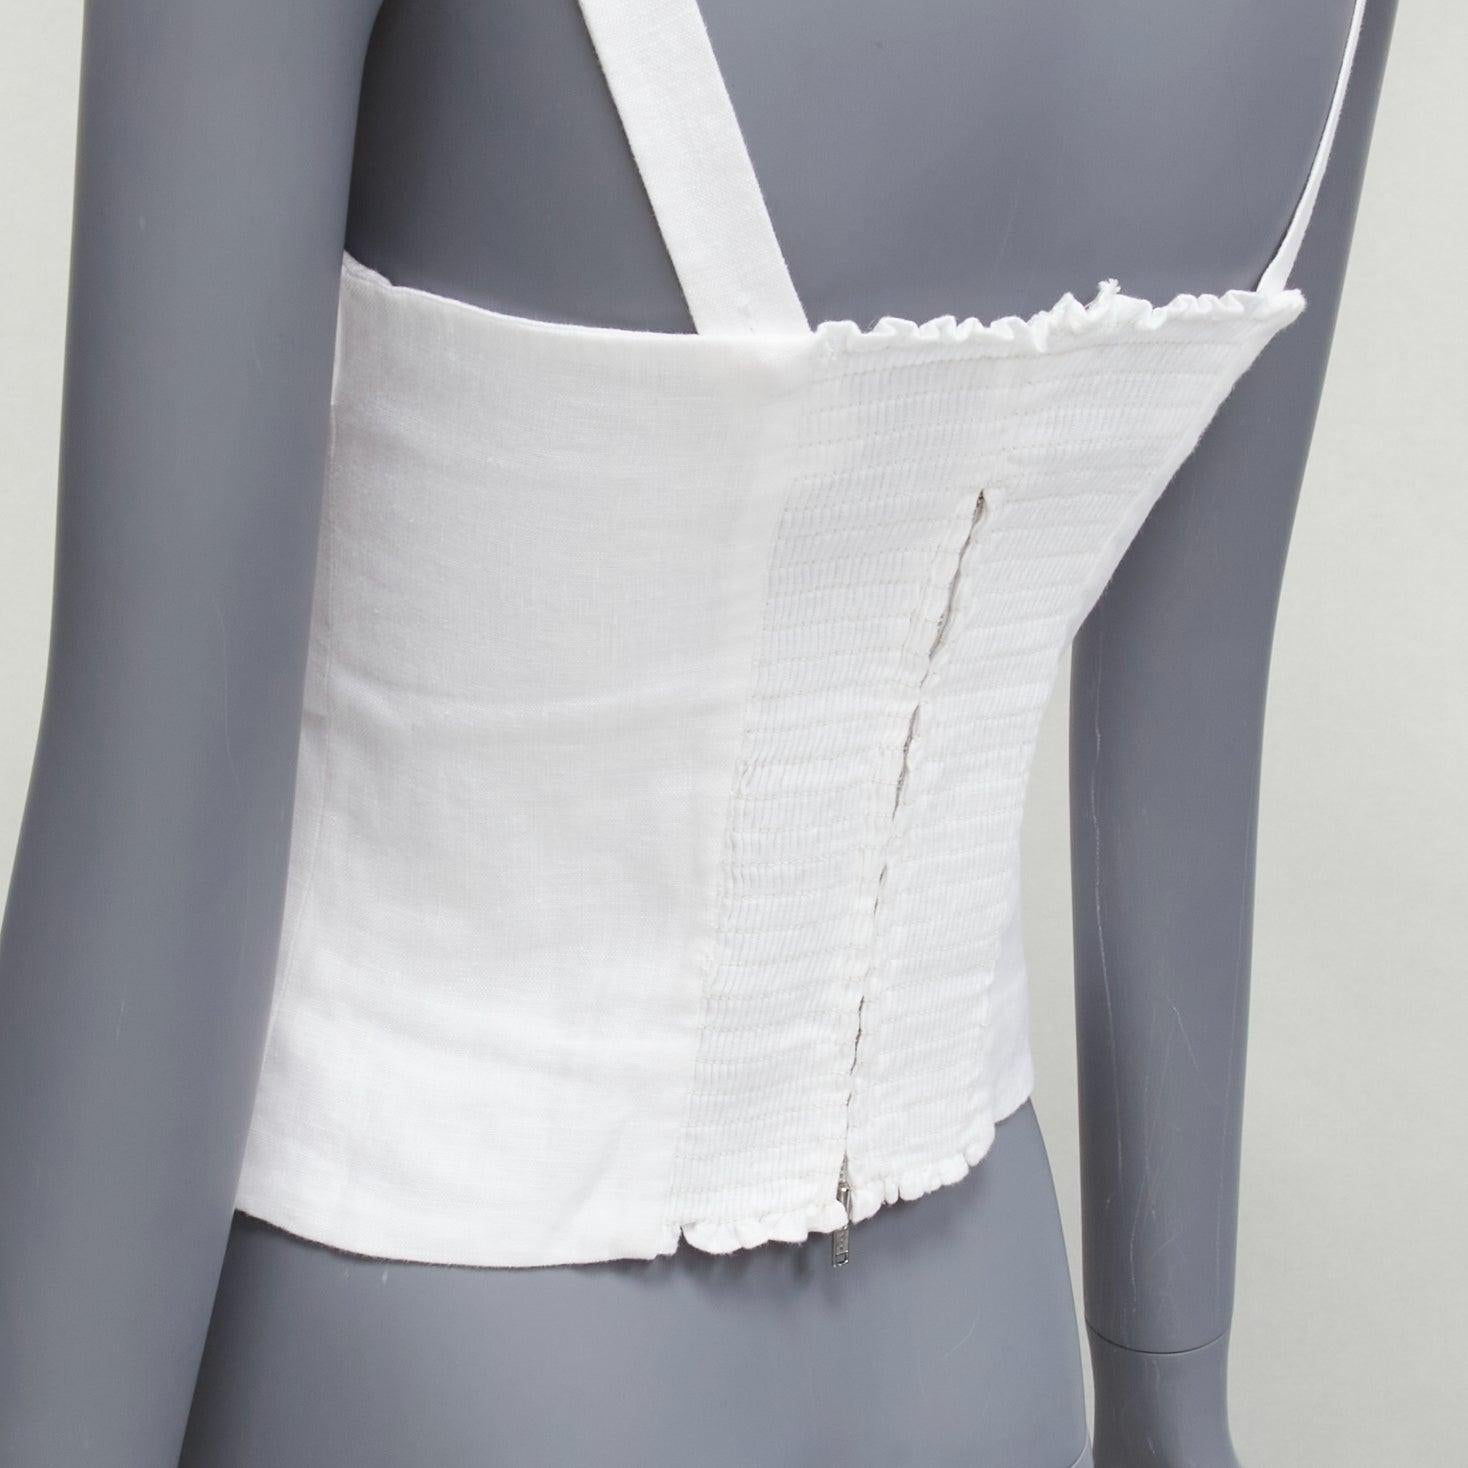 REFORMATION Sedgwick white linen bow detail foldover bust tank US2 S
Reference: SNKO/A00391
Brand: Reformation
Model: Sedgwick
Material: Linen
Color: White
Pattern: Solid
Closure: Zip
Lining: White Fabric
Extra Details: The Sedgwick is slim fitting